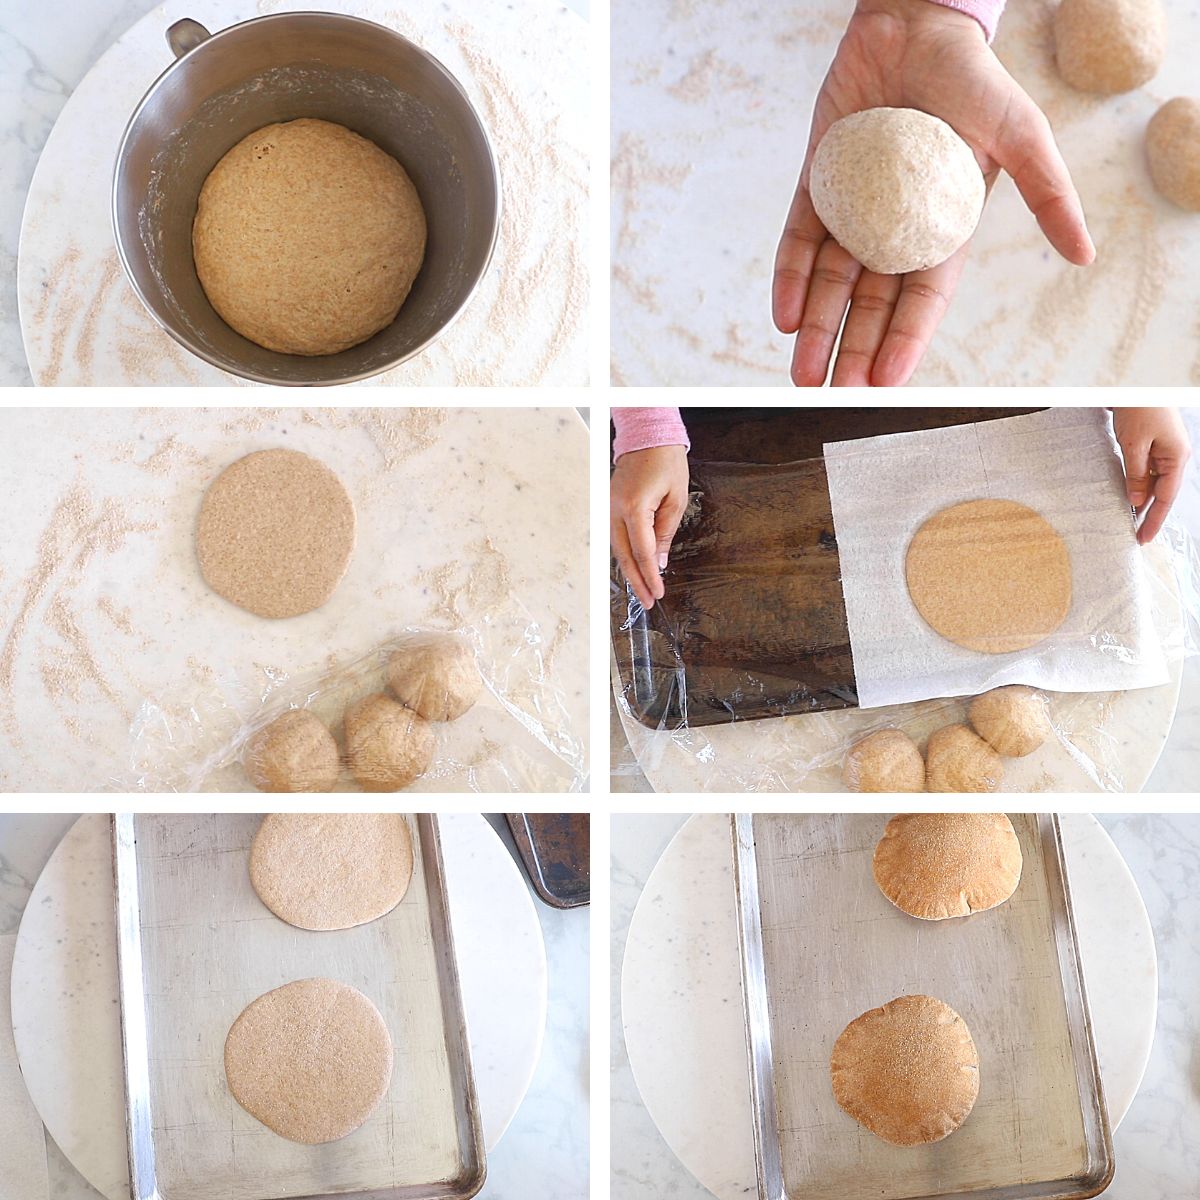 A collage of sex images showing how to shape and bake whole wheat pita bread.